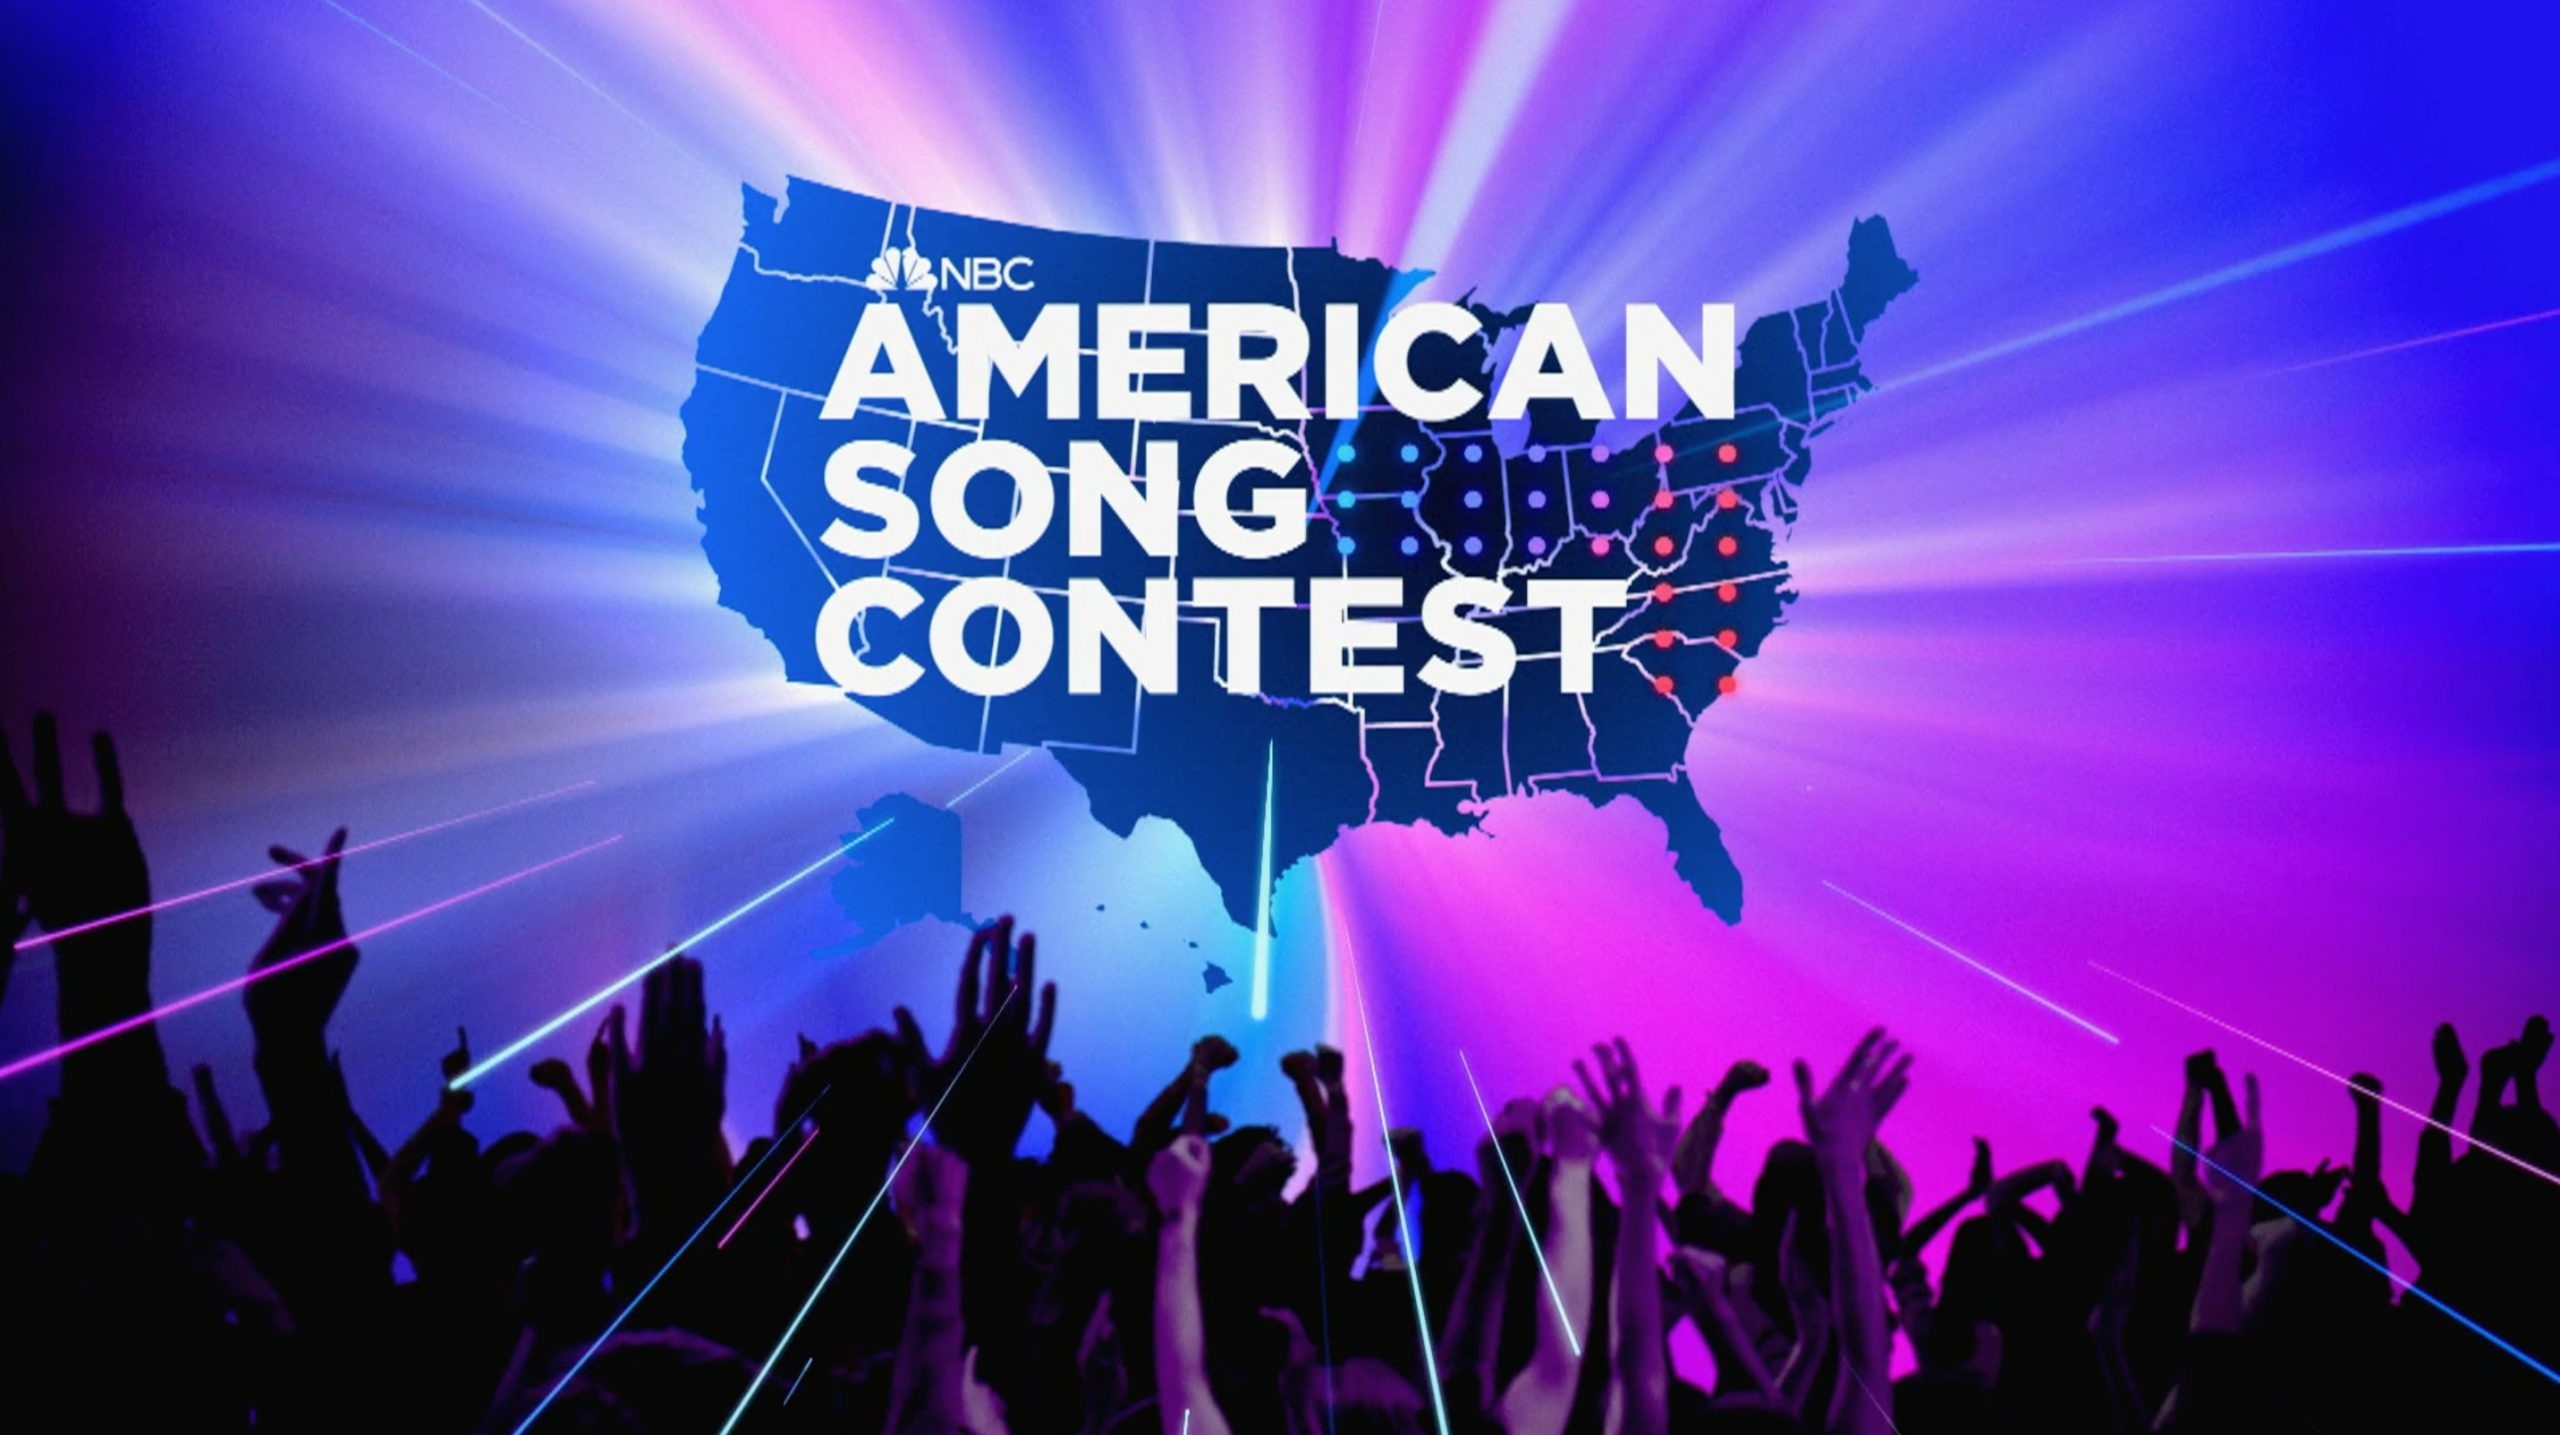 American Song Contest, Swedish broadcast rights, Live telecast, Musical excitement, 2560x1440 HD Desktop